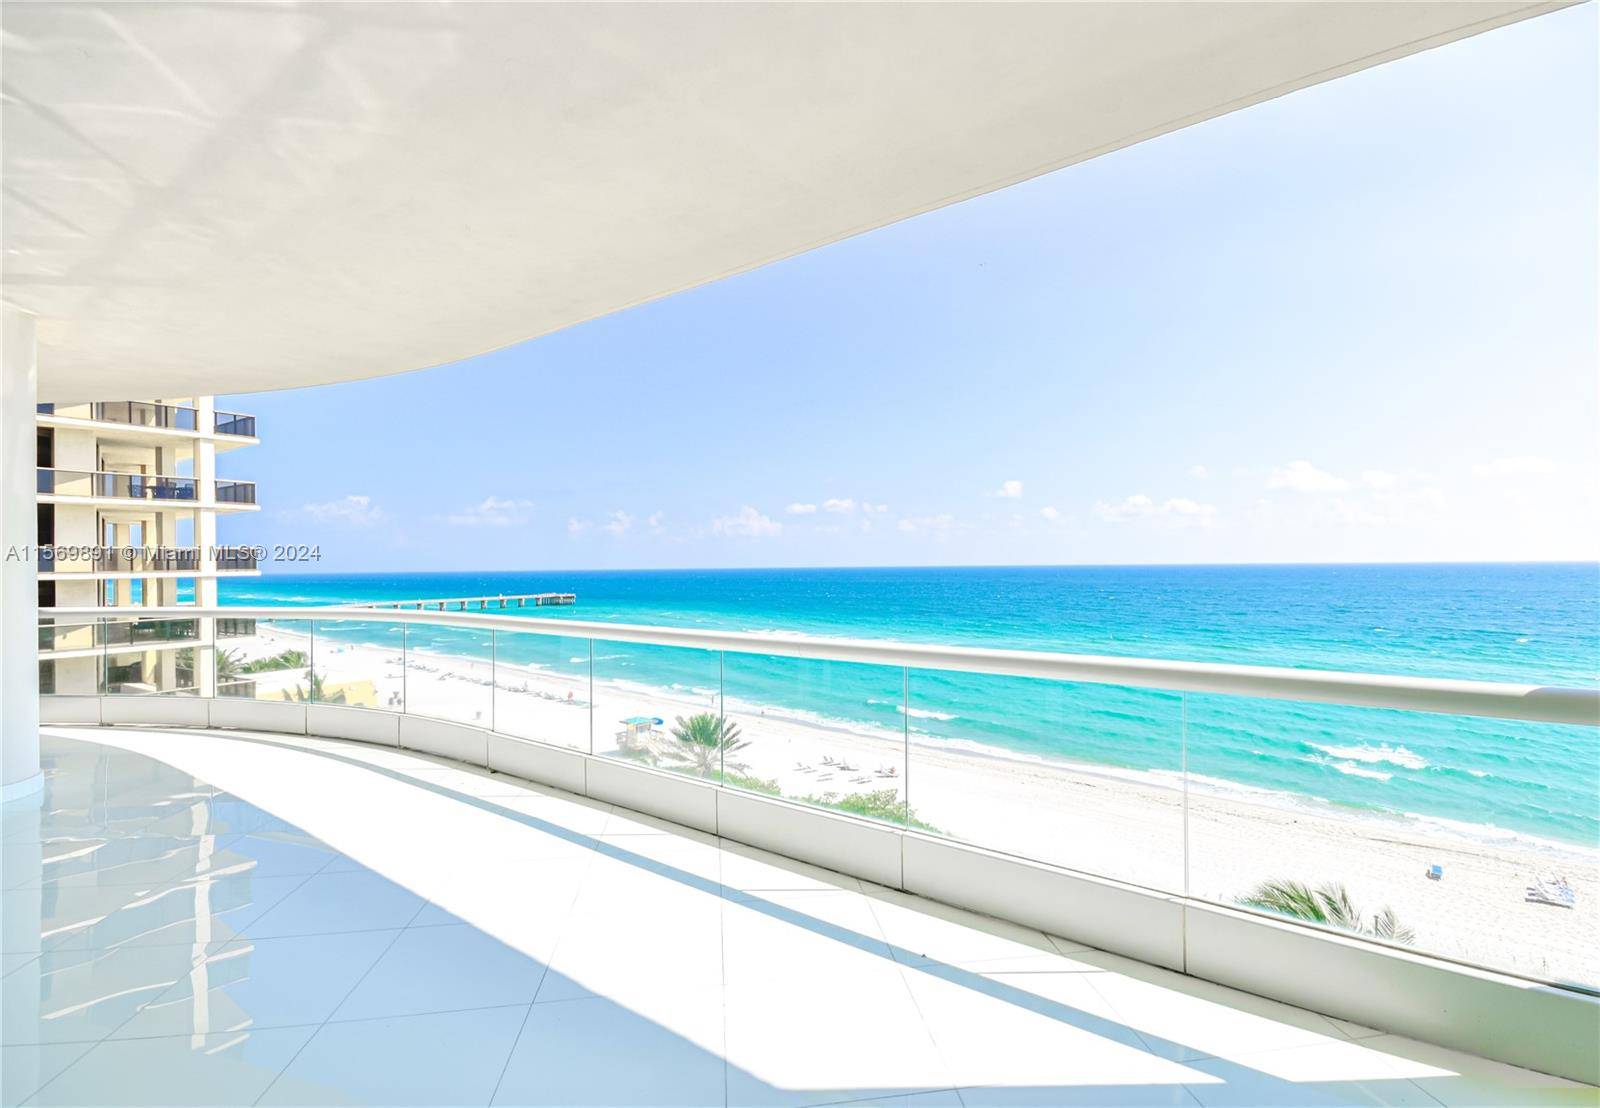 Exquisite 4 bedroom, 6. 5 bath unit at Turnberry Ocean Colony, adorned by professional design.